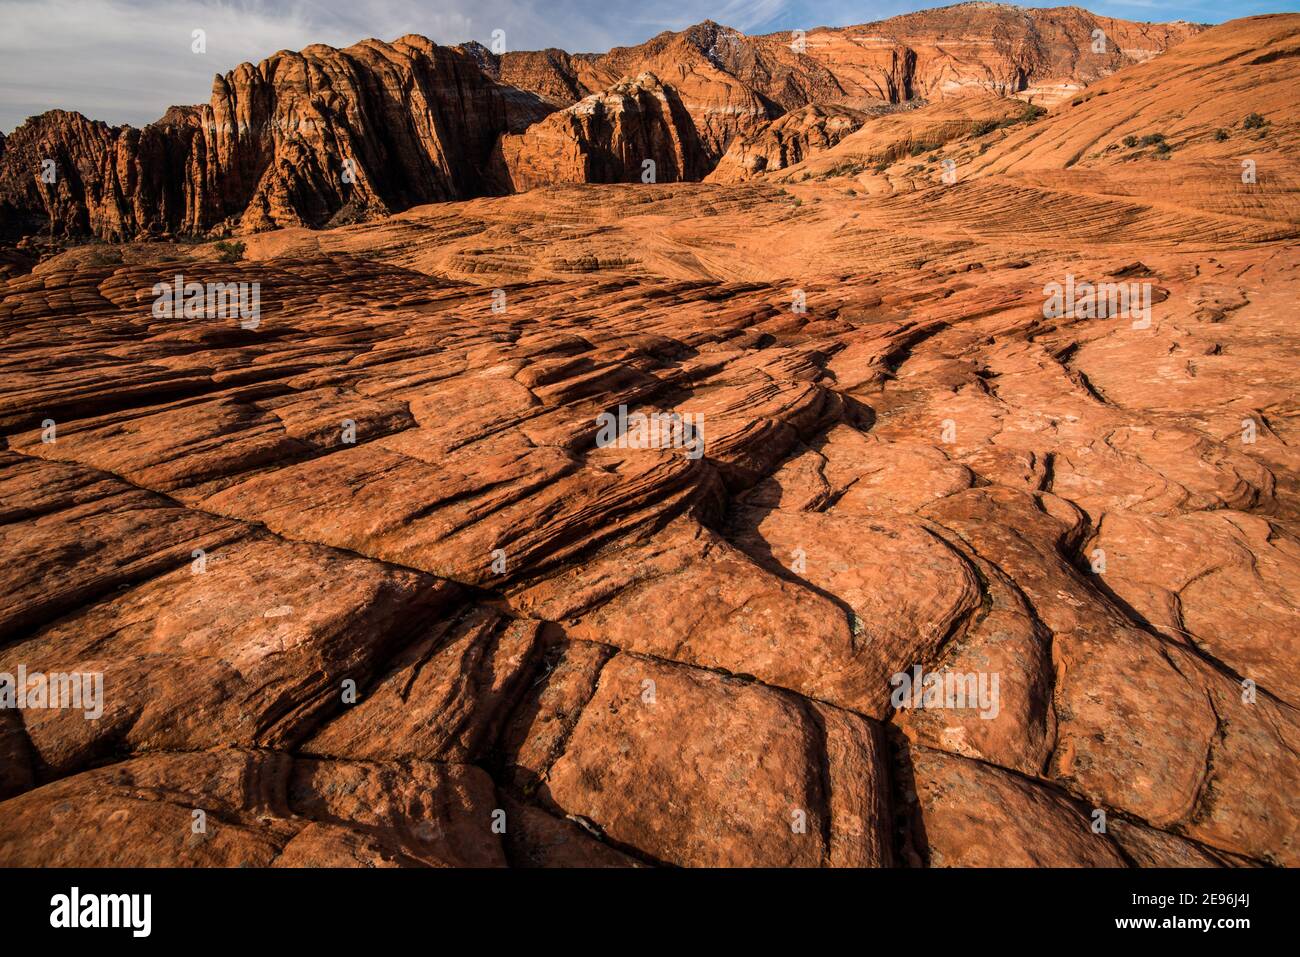 The textures and patterns of petrified sand dunes in Snow Canyon State Park, Utah, USA.  It is known for its petrified sand dunes and rock formations. Stock Photo